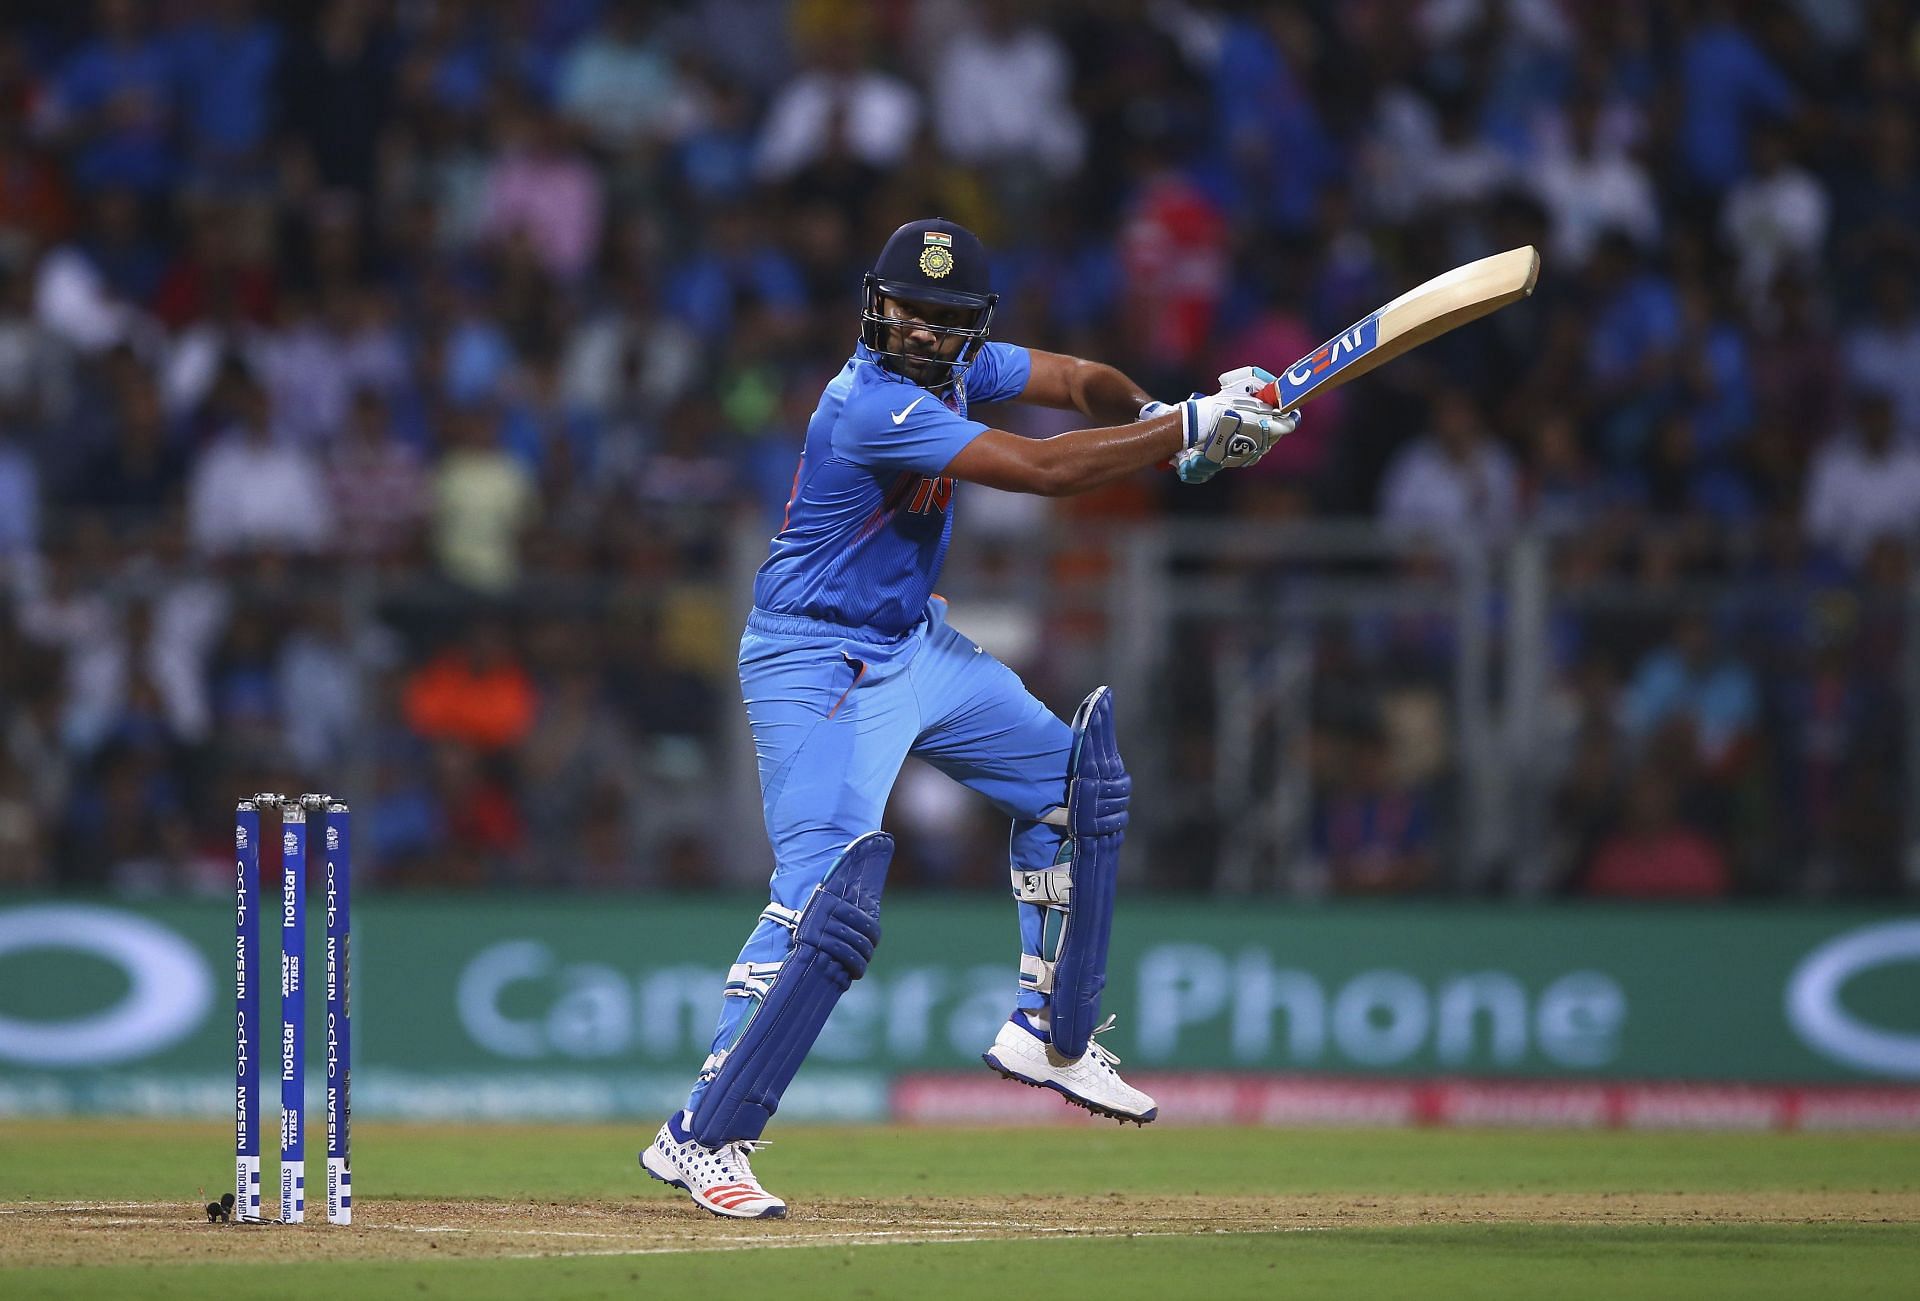 Rohit Sharma in action at the ICC World Twenty20, 2016 (Getty Images)